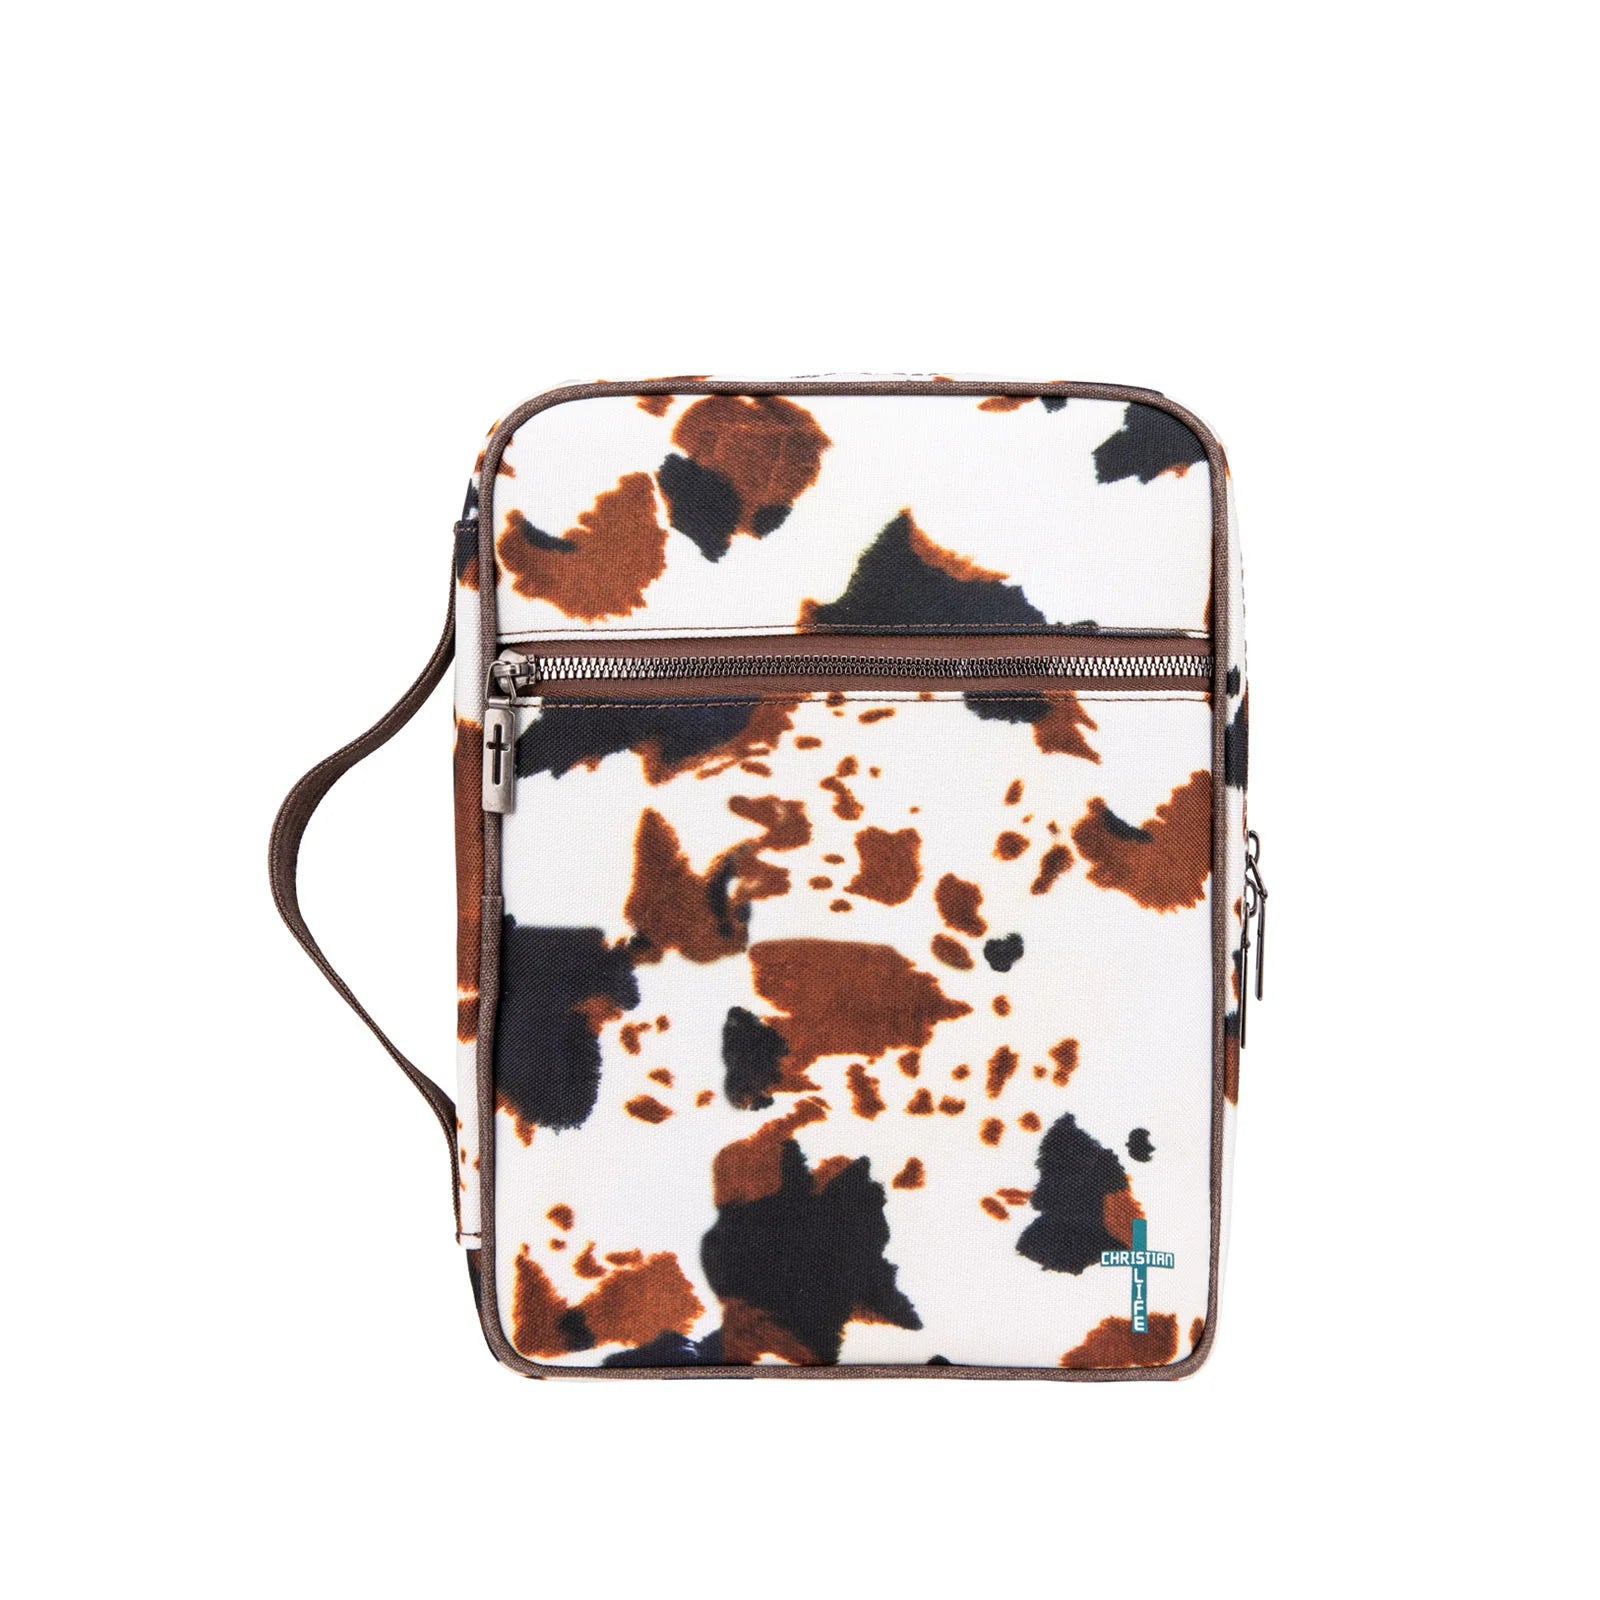 Montana West Cowhide Print Bible Cover